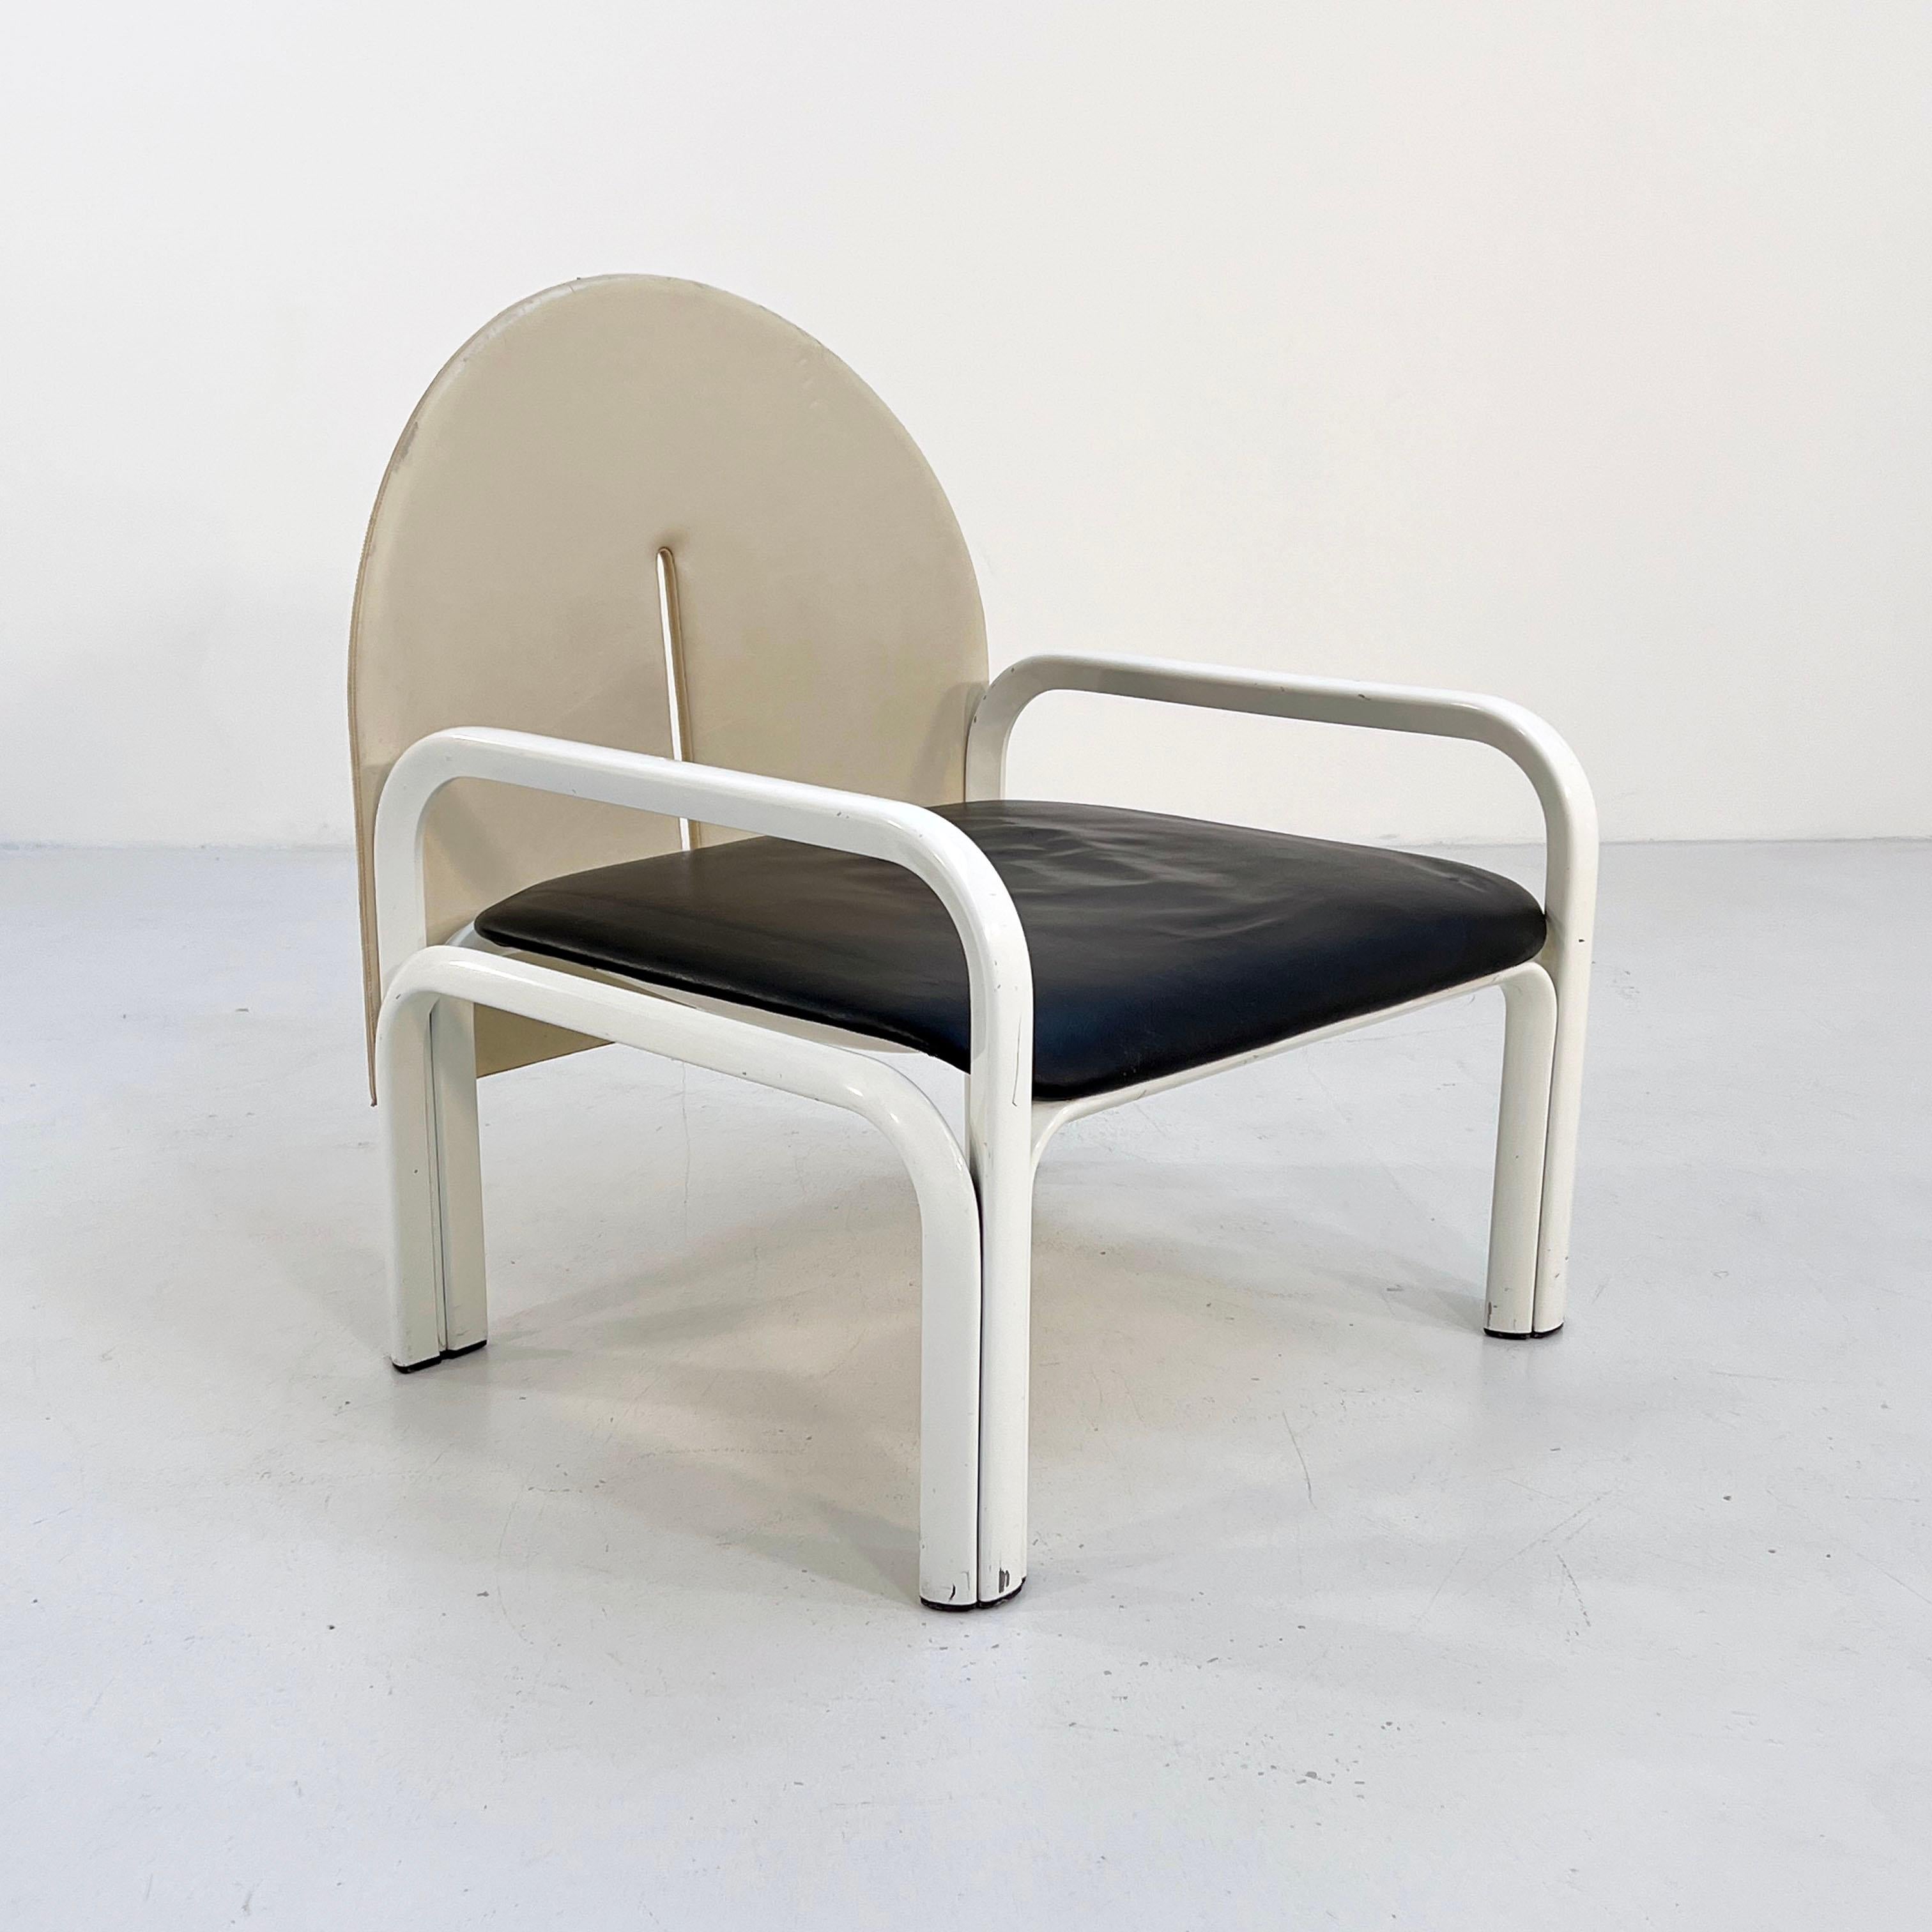 Designer - Gae Aulenti
Producer - Knoll
Model - 54 L Armchairs
Design Period - Seventies 
Measurements - Width 70 cm x Depth 61 cm x Height 77 cm x Seat Height 35 cm
Materials - Leather, Metal
Color - White, Beige, Black
In its own element.